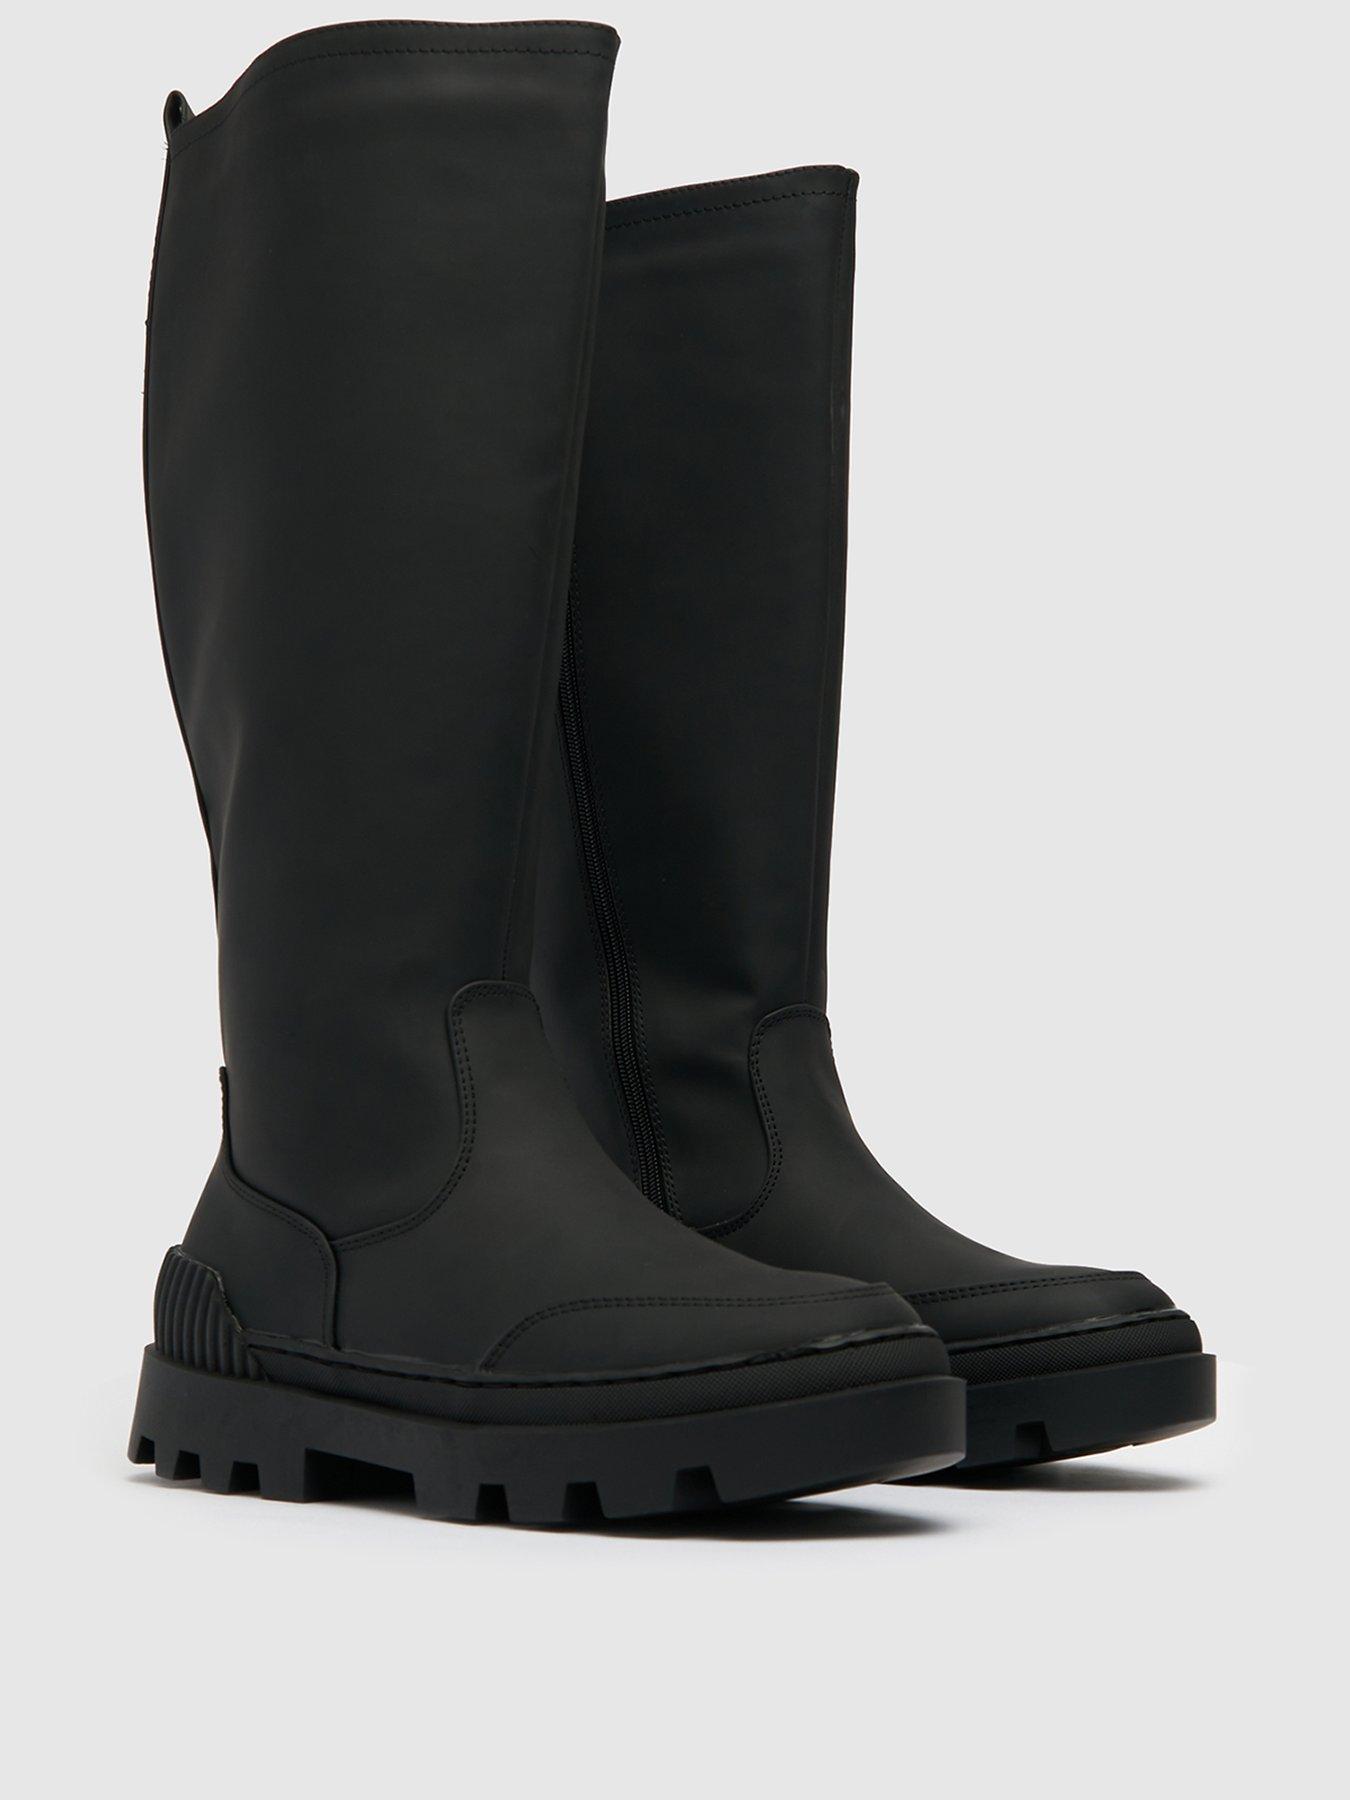 Shoes & boots Rubberised Knee Boot - Black